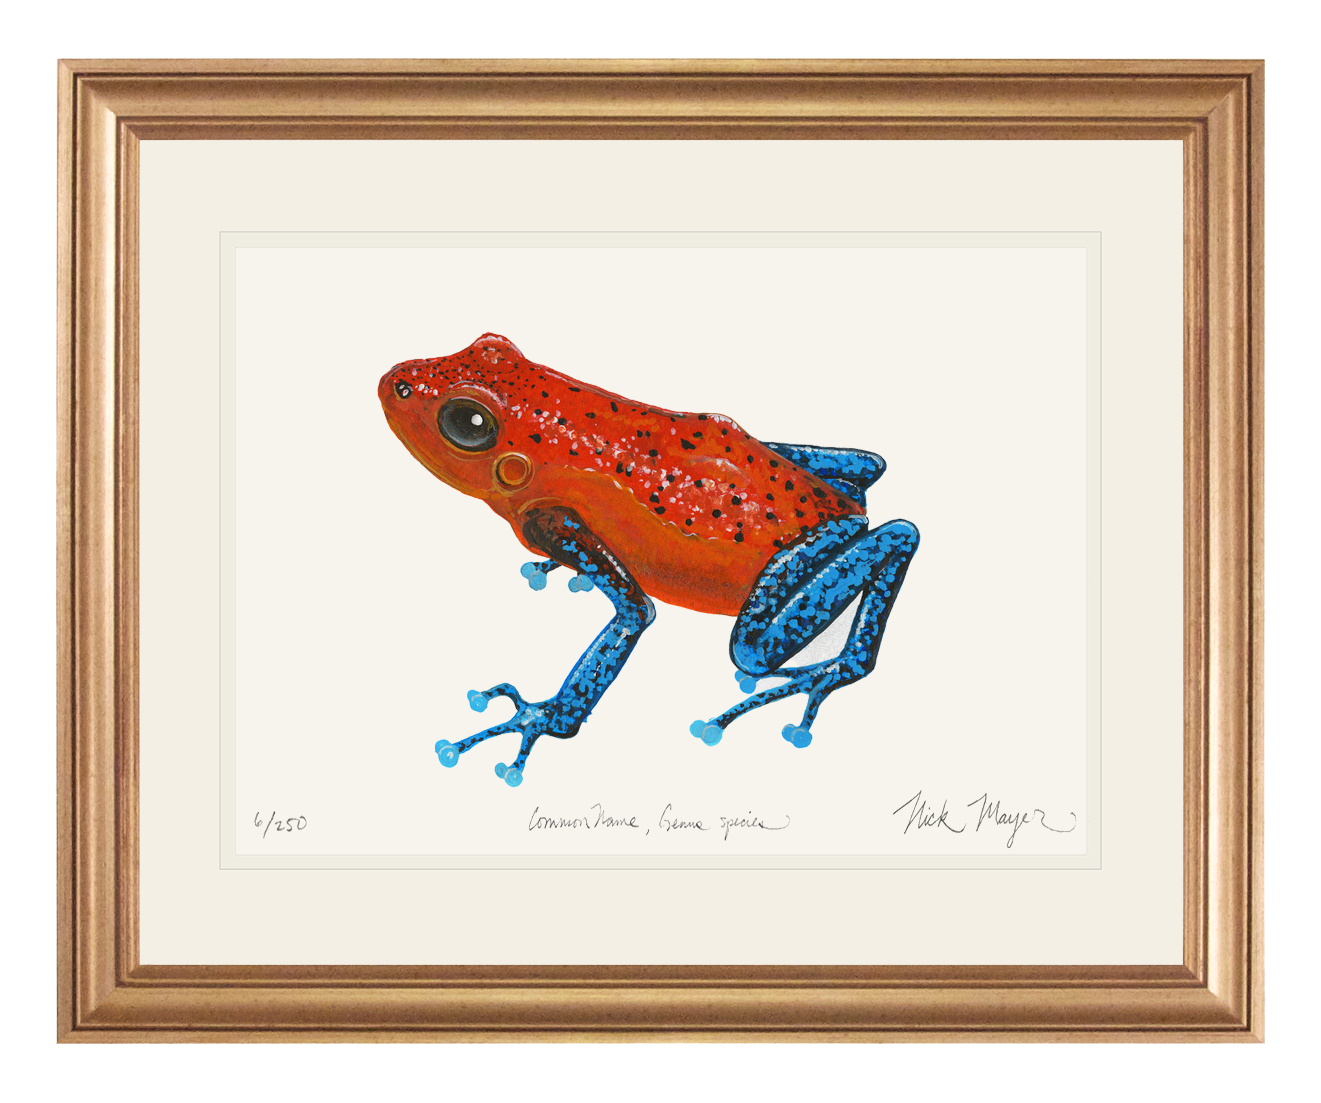 Frogs Species of Central America Poster Print